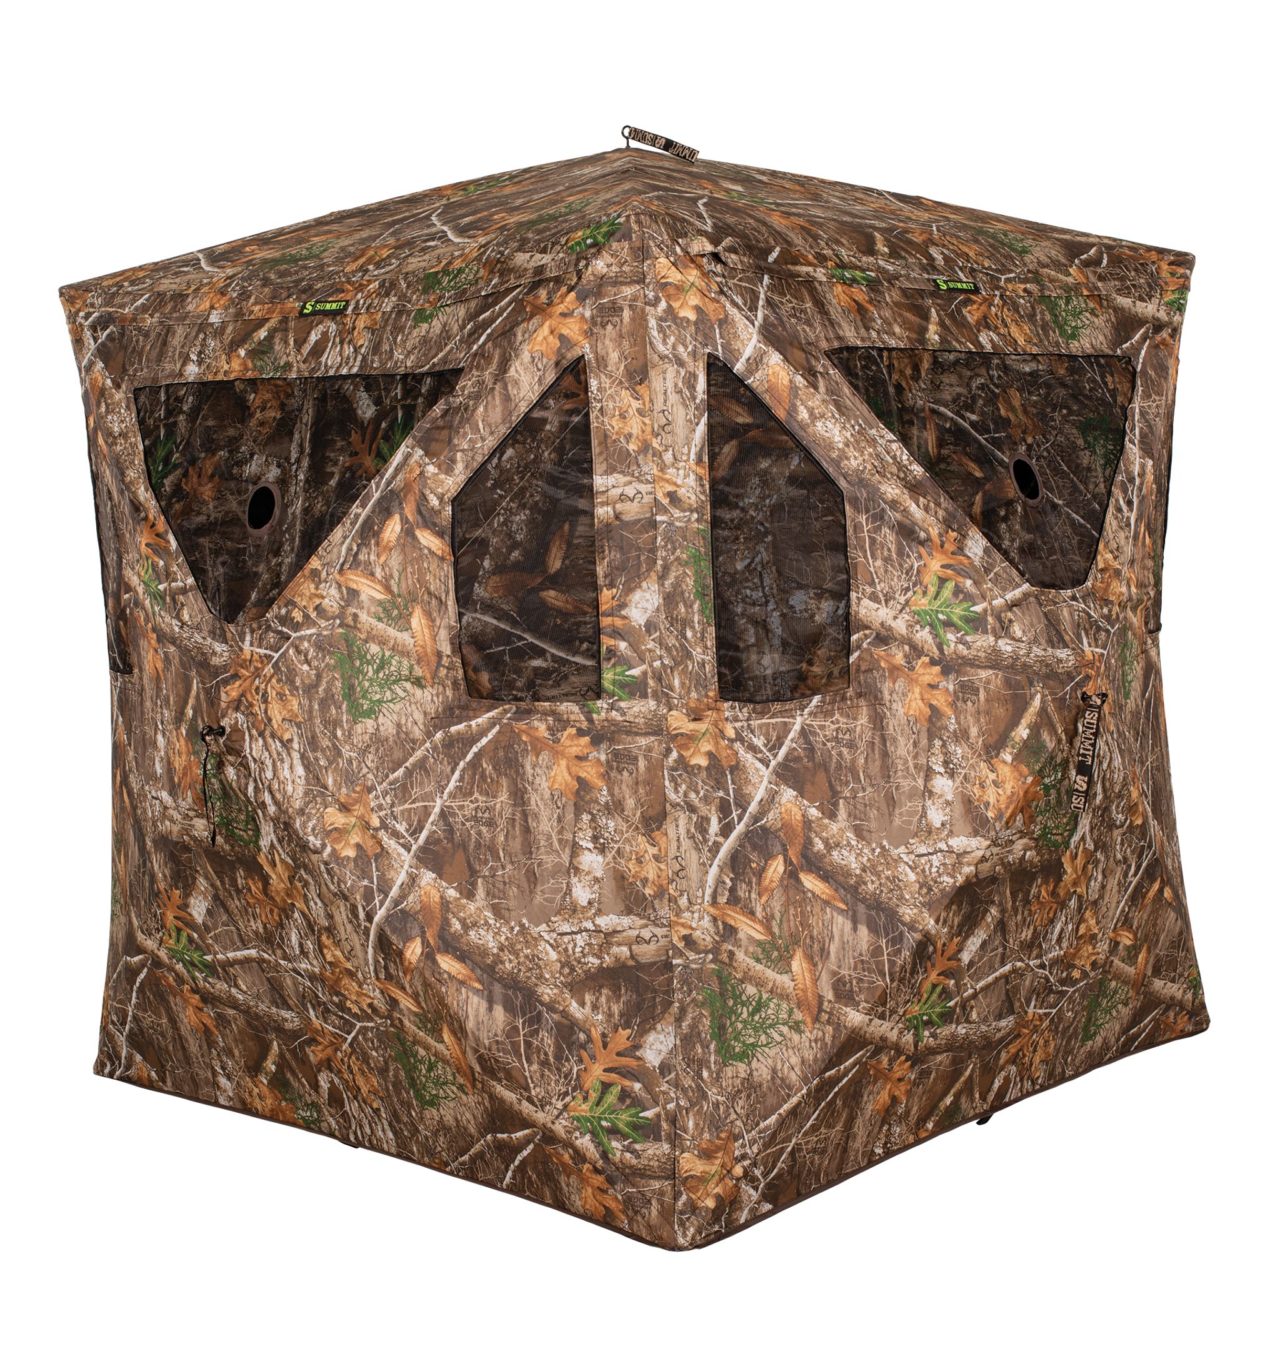 Summit Vital Ground Blind Combines Quality and Incredible Value